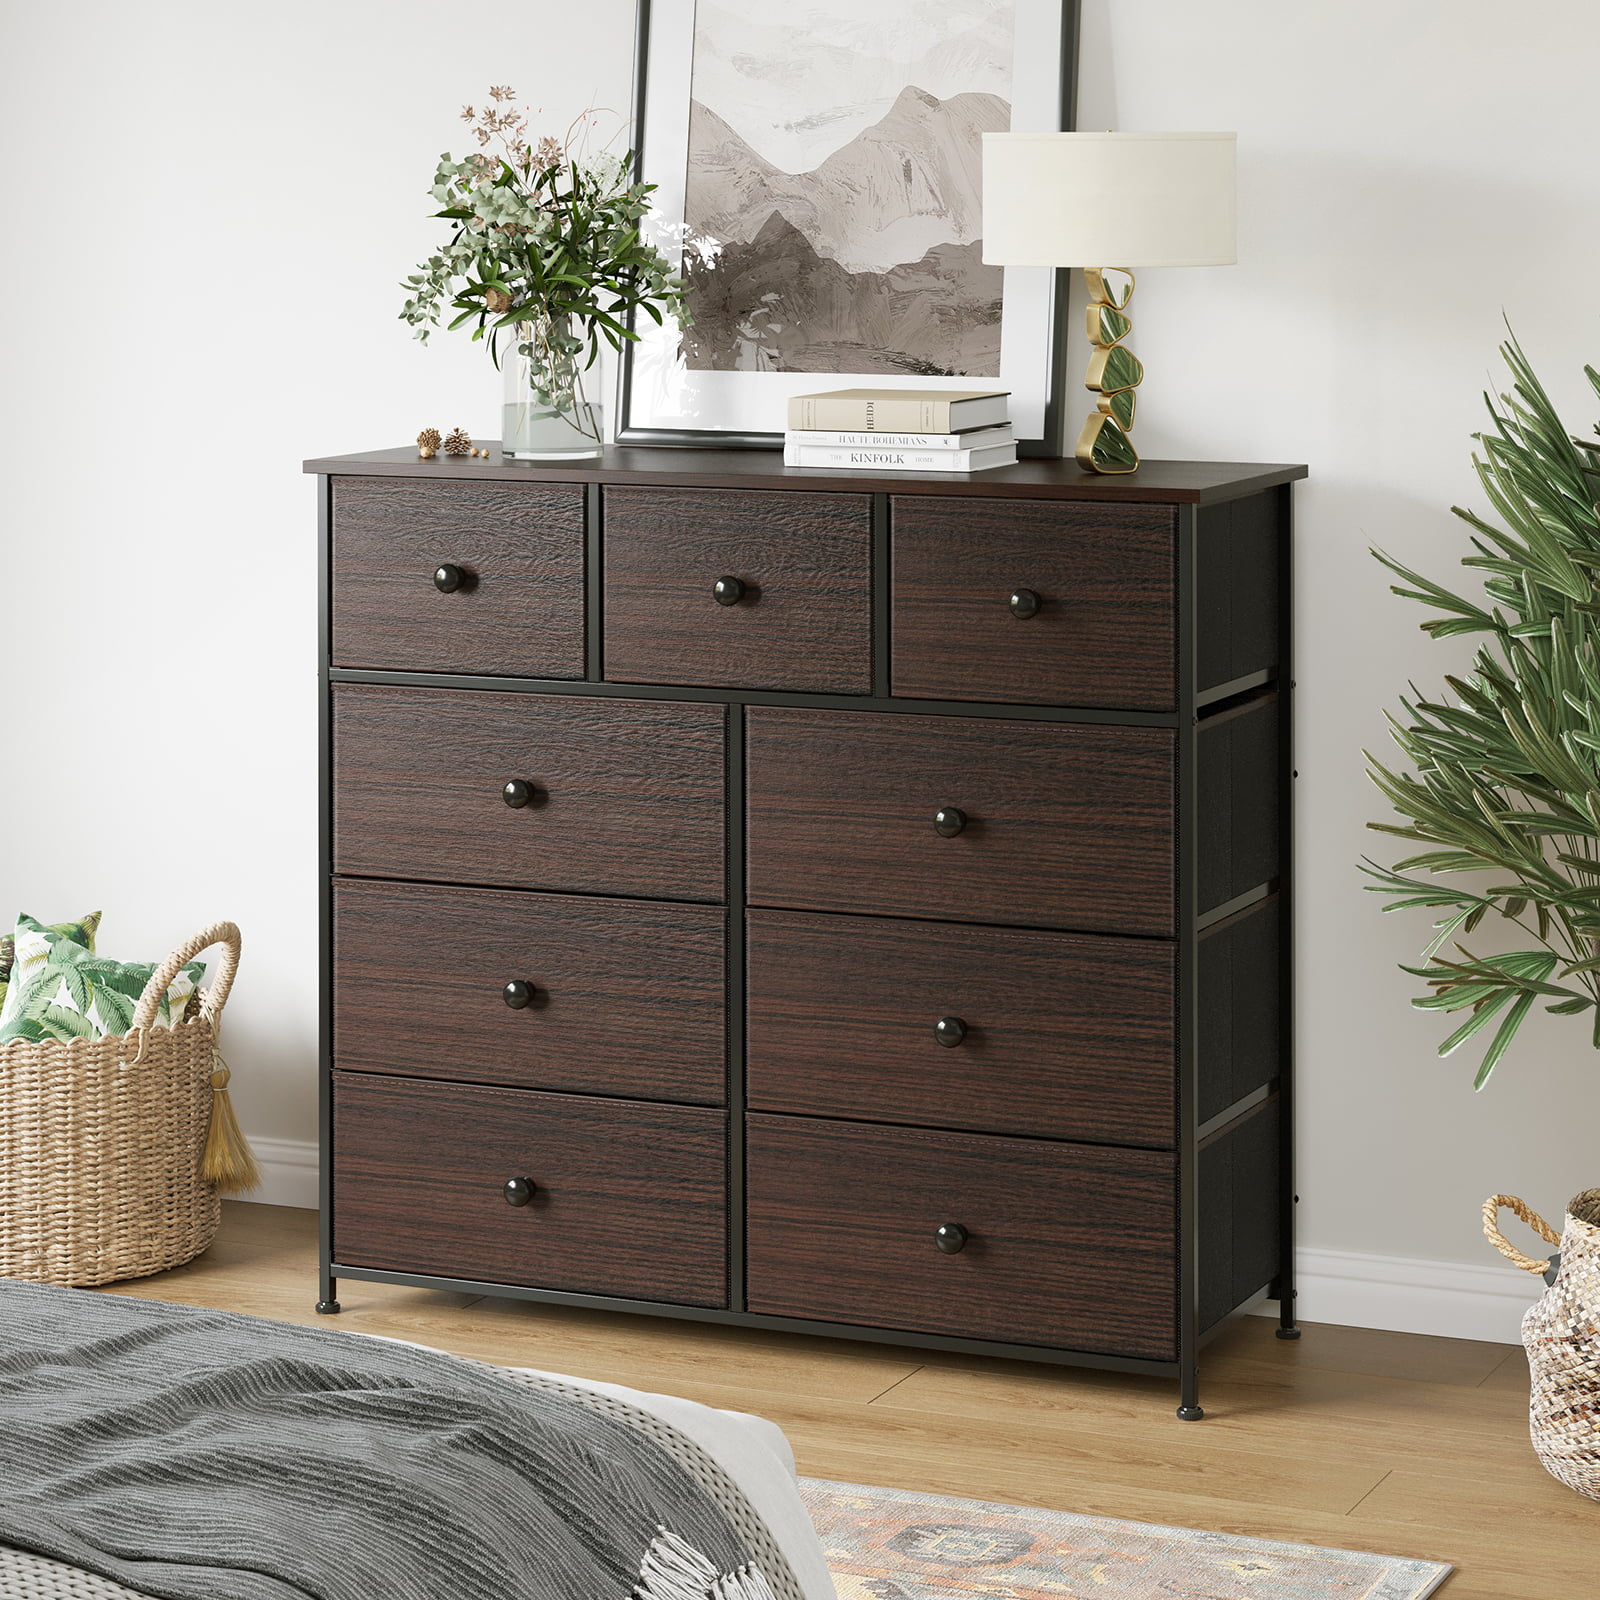 Chest of Drawers Rustic 5-Drawer Dresser Storage Floor Cabinet for Home Walnut 